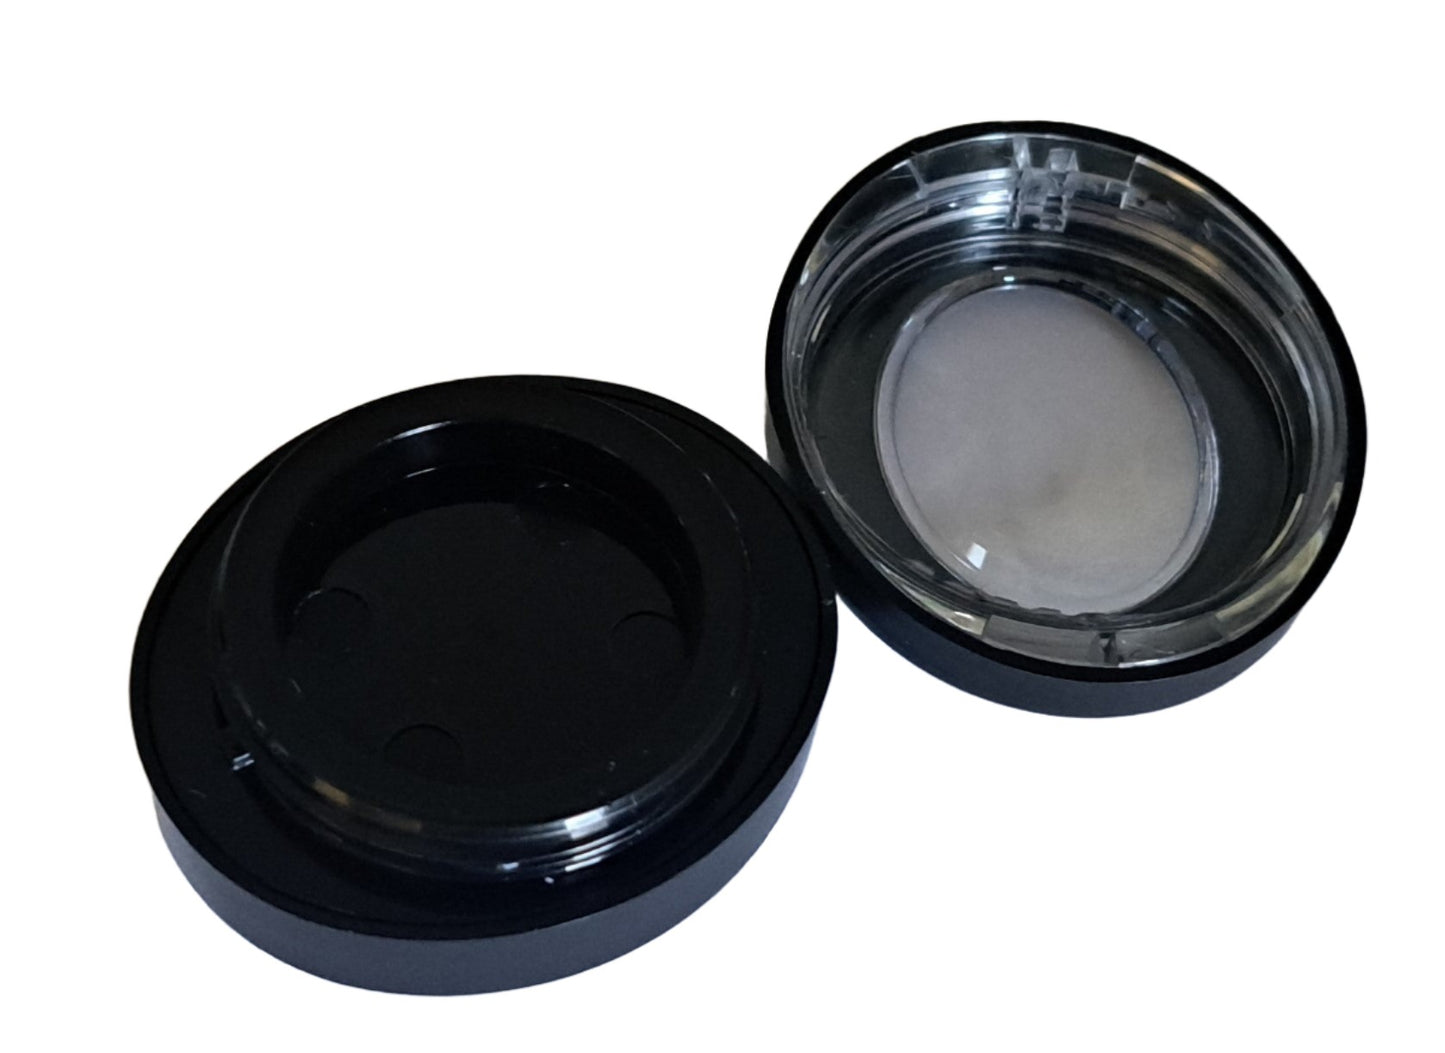 Sample Containers -Filled with any product